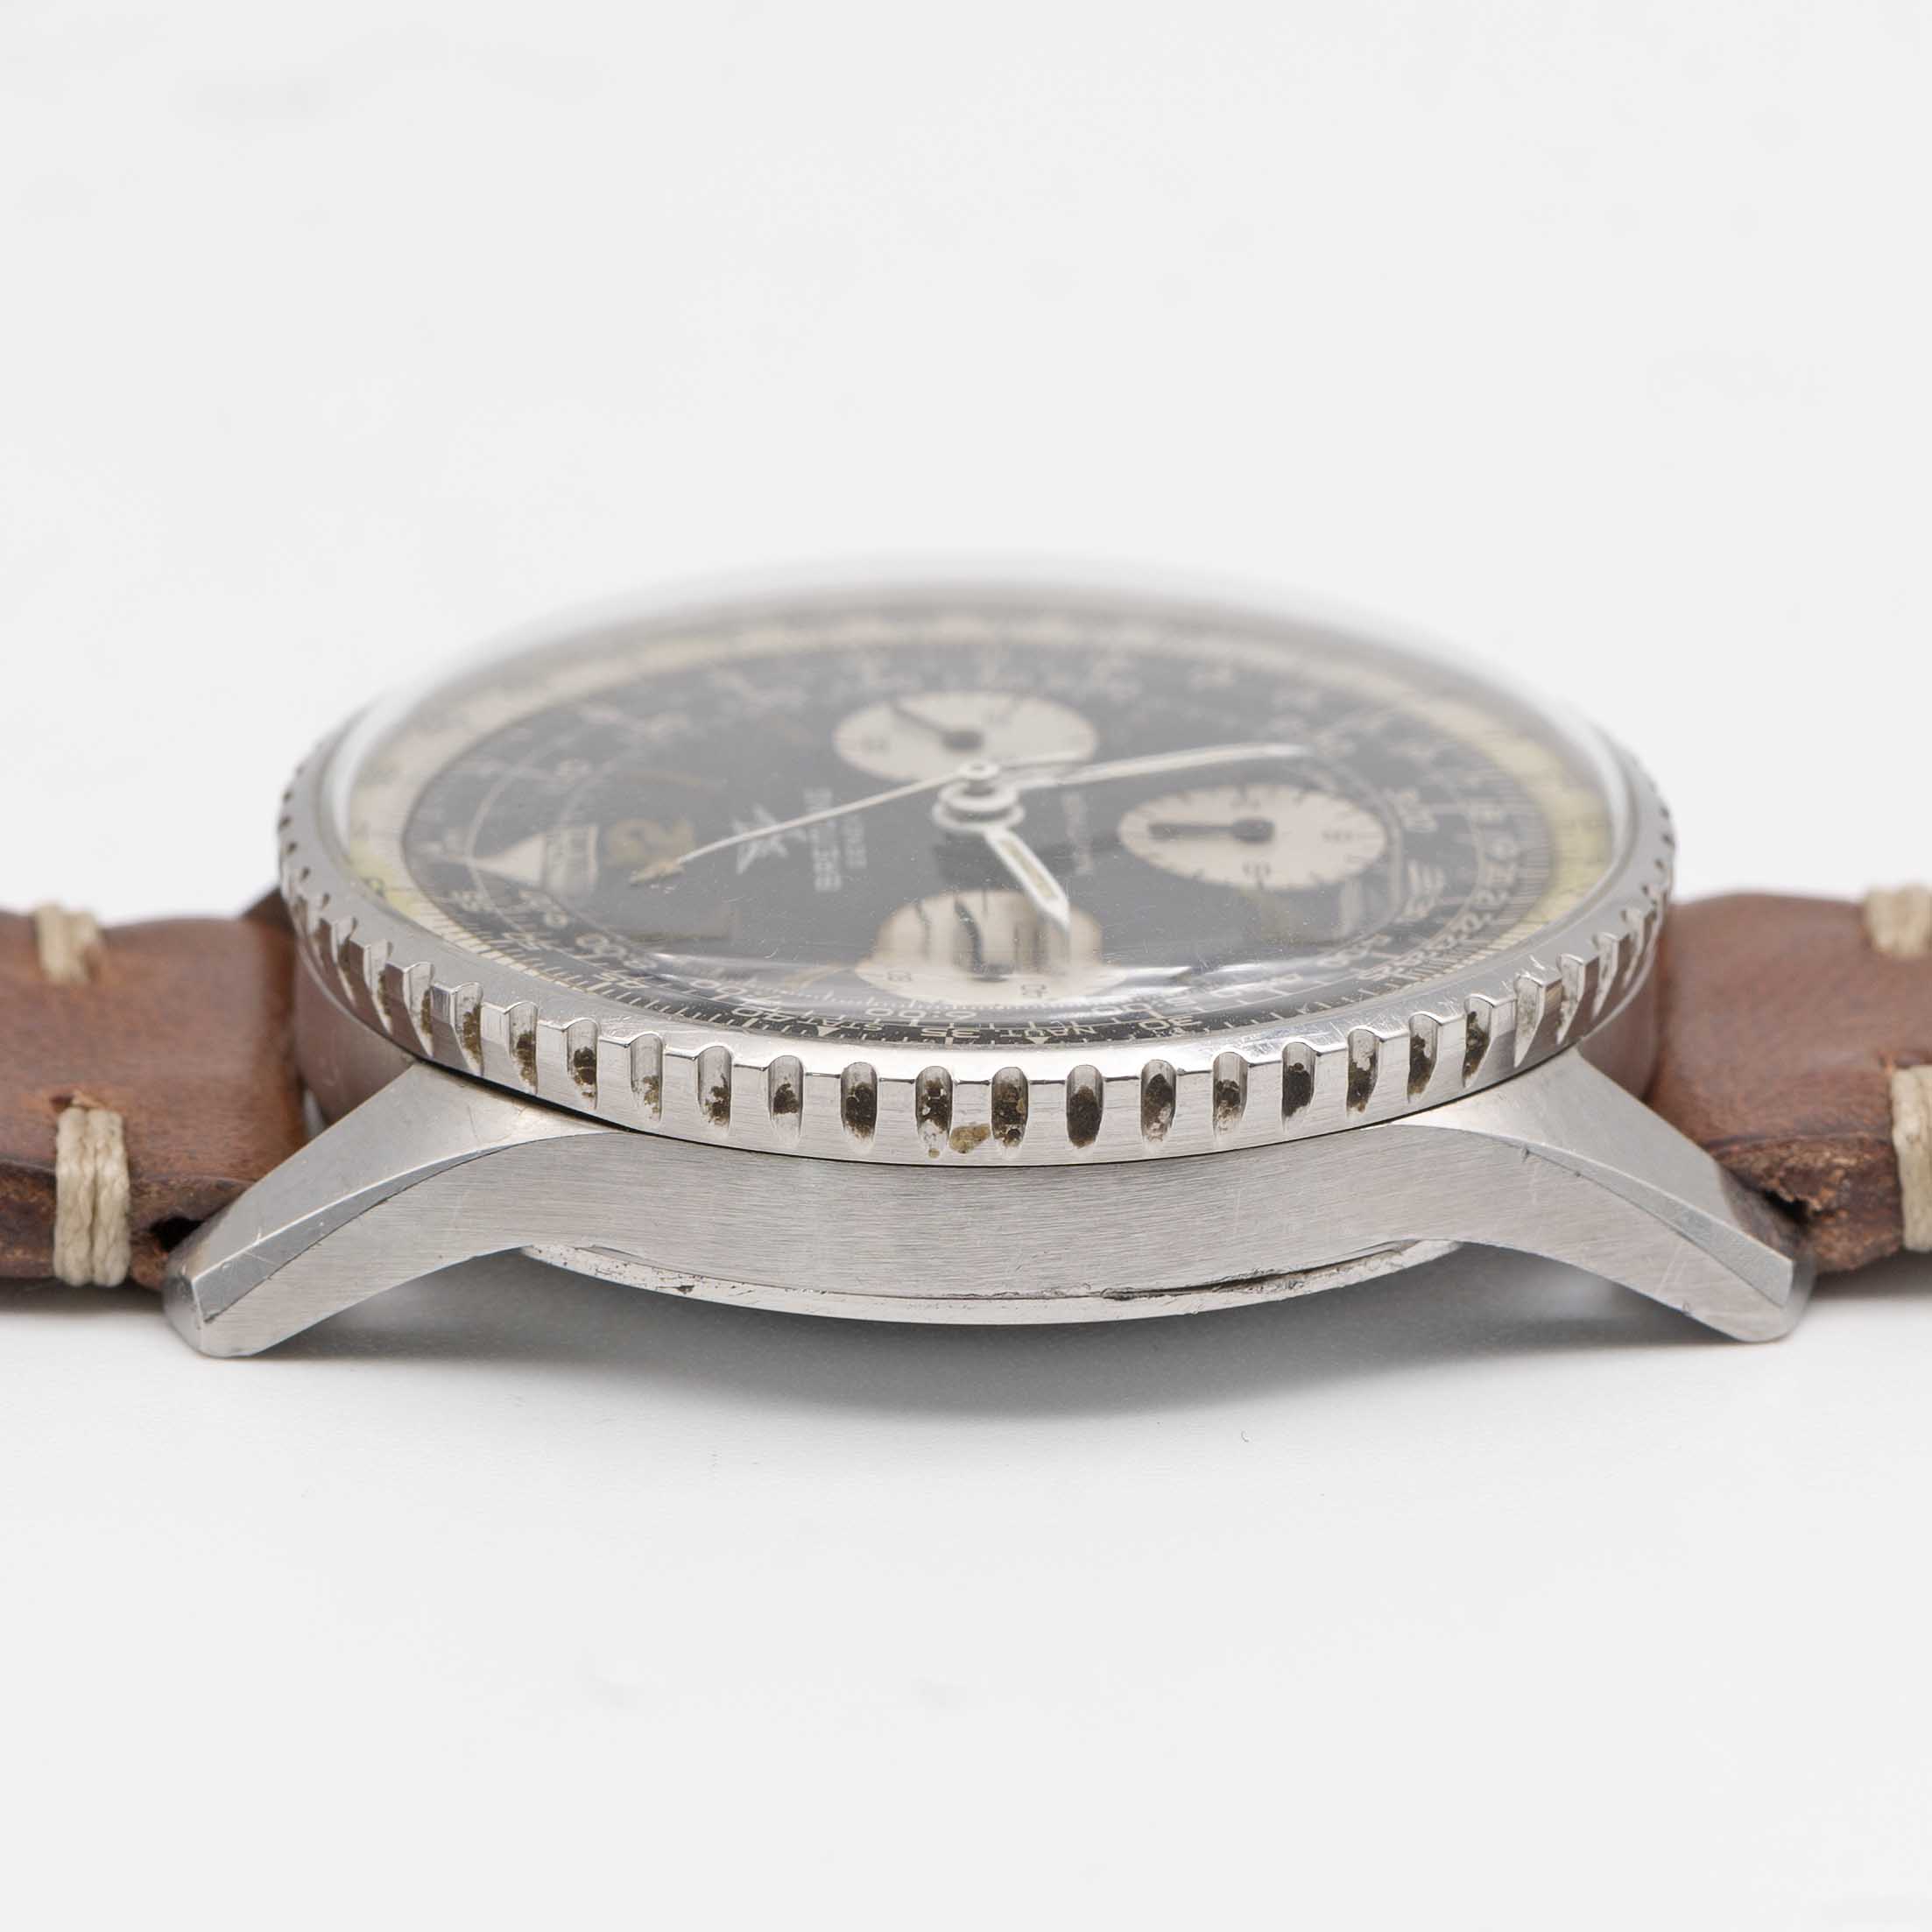 A GENTLEMAN'S STAINLESS STEEL BREITLING NAVITIMER CHRONOGRAPH WRIST WATCH CIRCA 1966, REF. 806 - Image 8 of 8